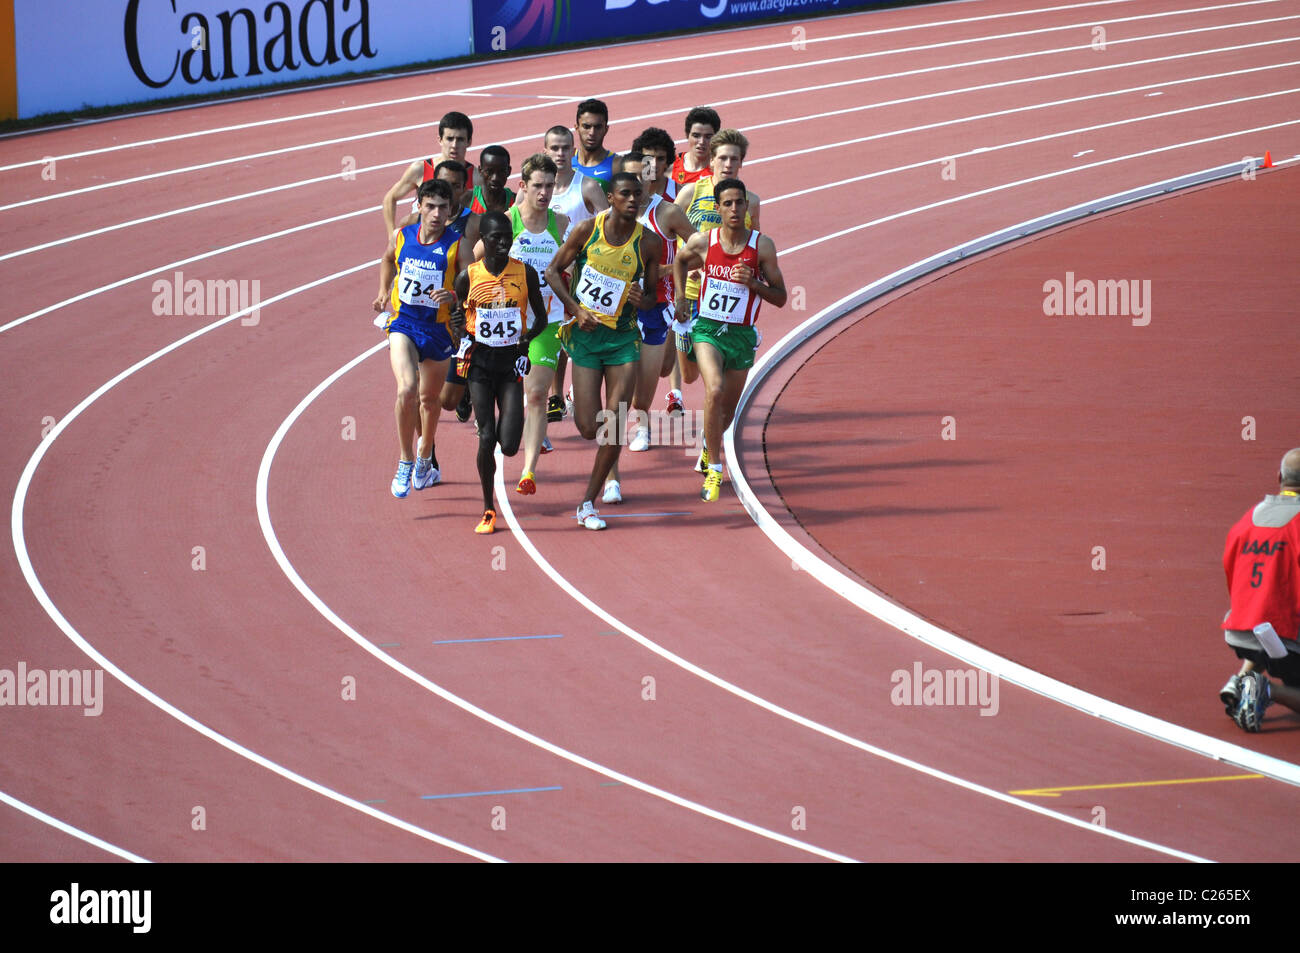 World  Junior Championships in Athletics Moncton Canada 2010 1500m. Pack of runners. Stock Photo